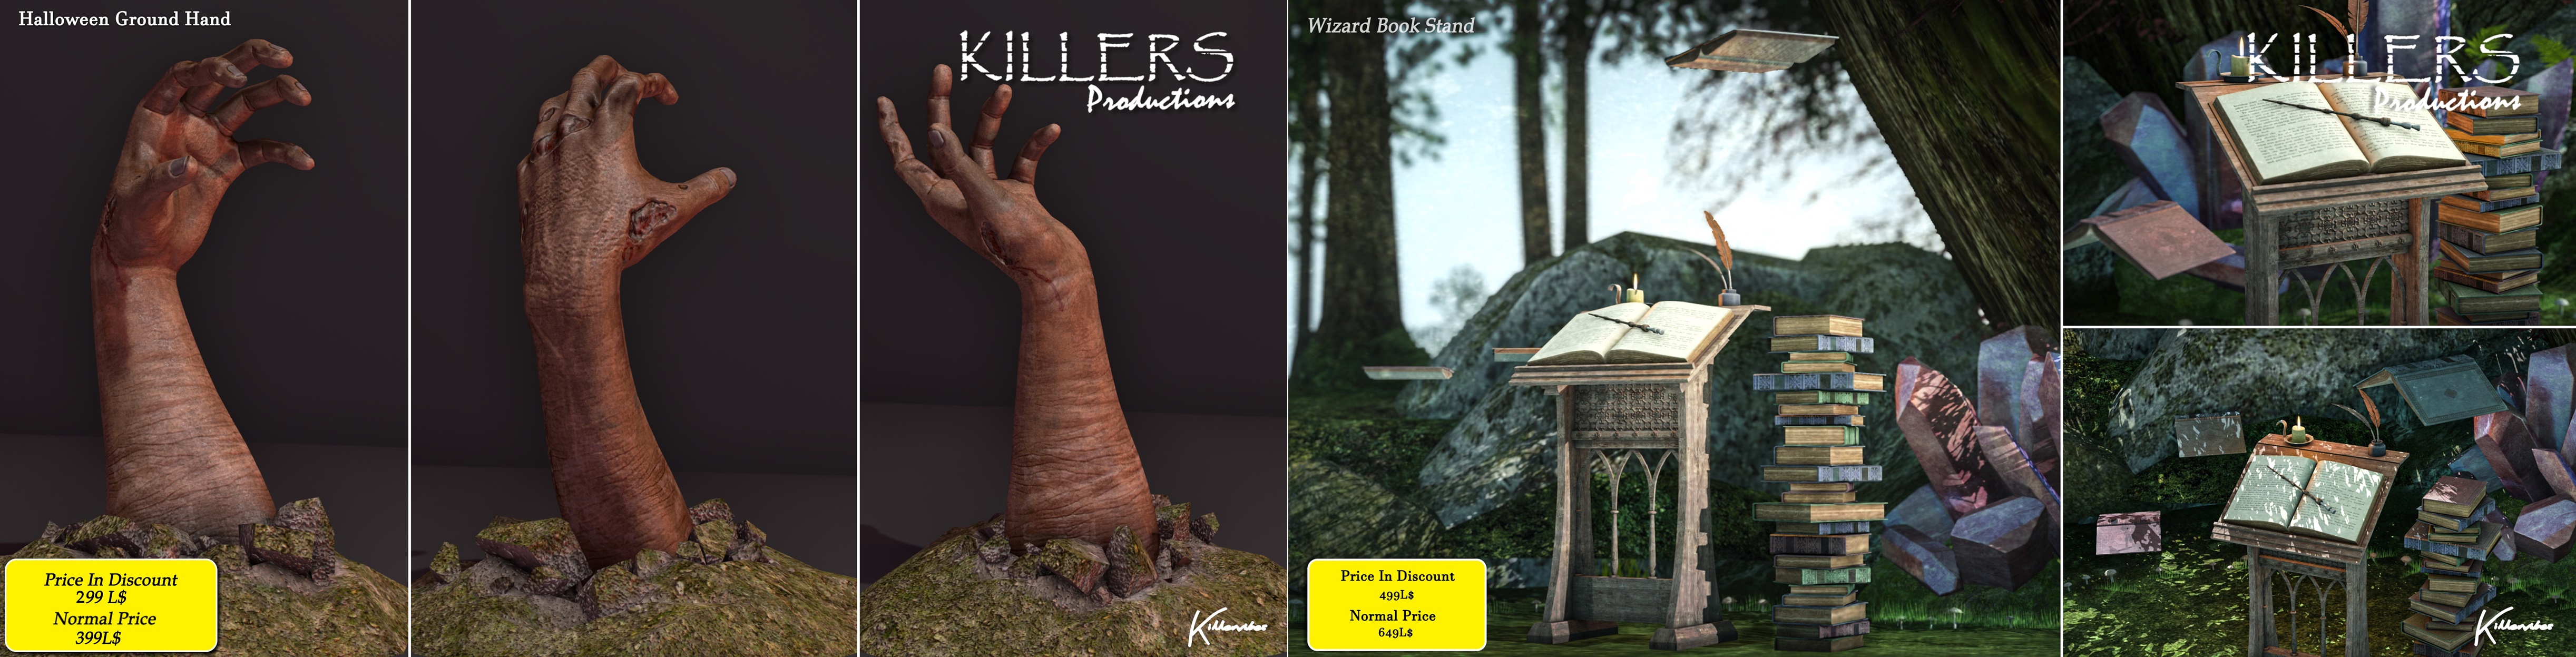 Killers Productions – Halloween Ground Hand & Wizard Book Stand